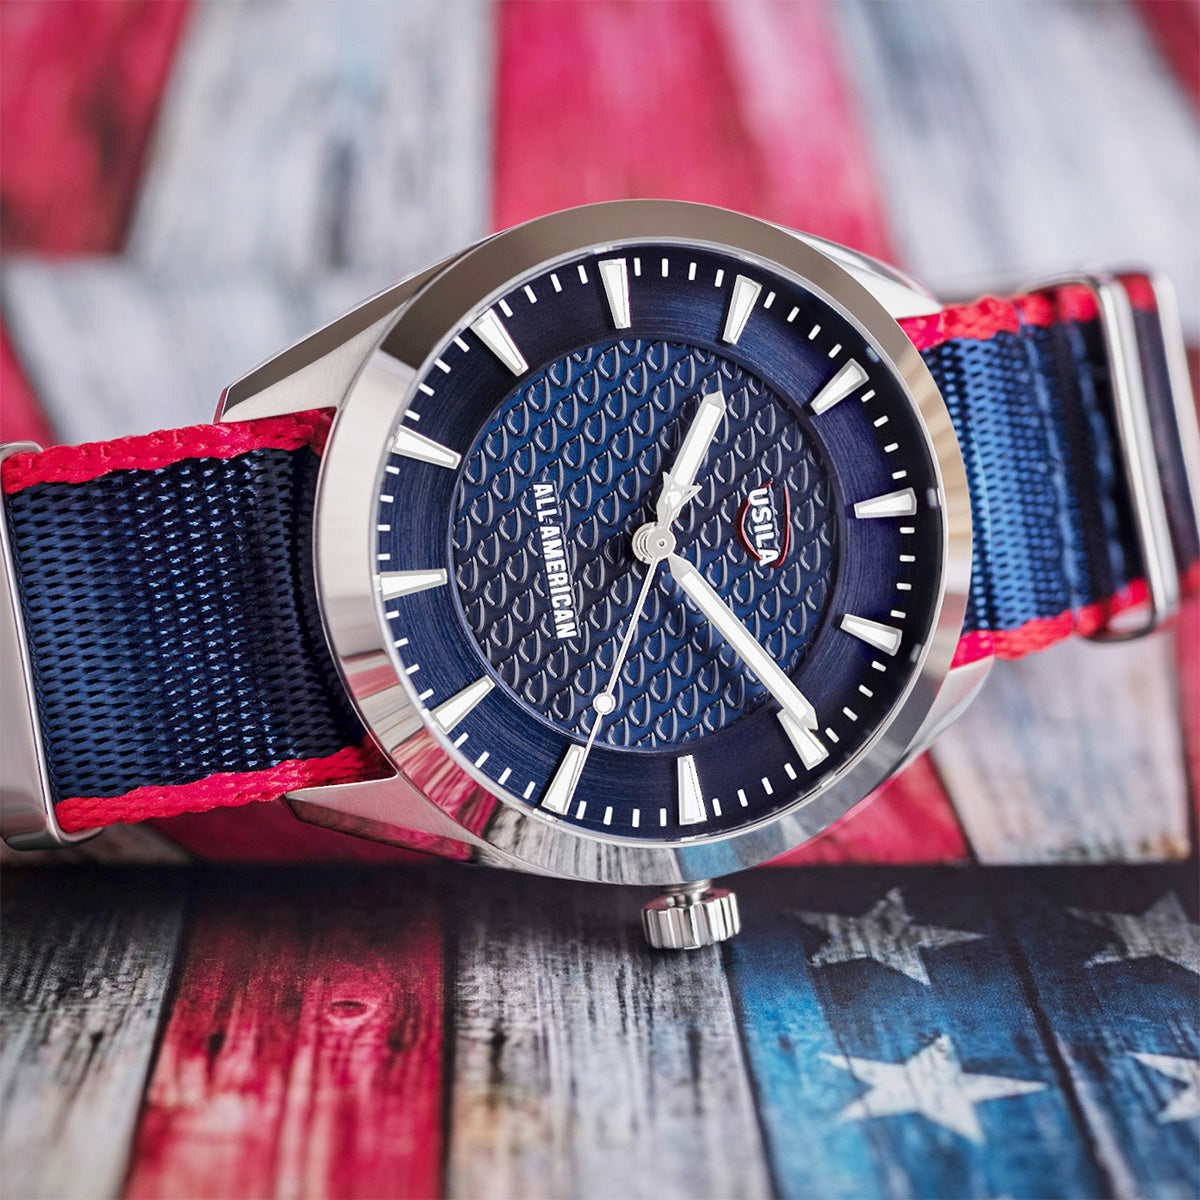 USILA All American Kairos II Swiss made automatic watch. Table view NATO strap.